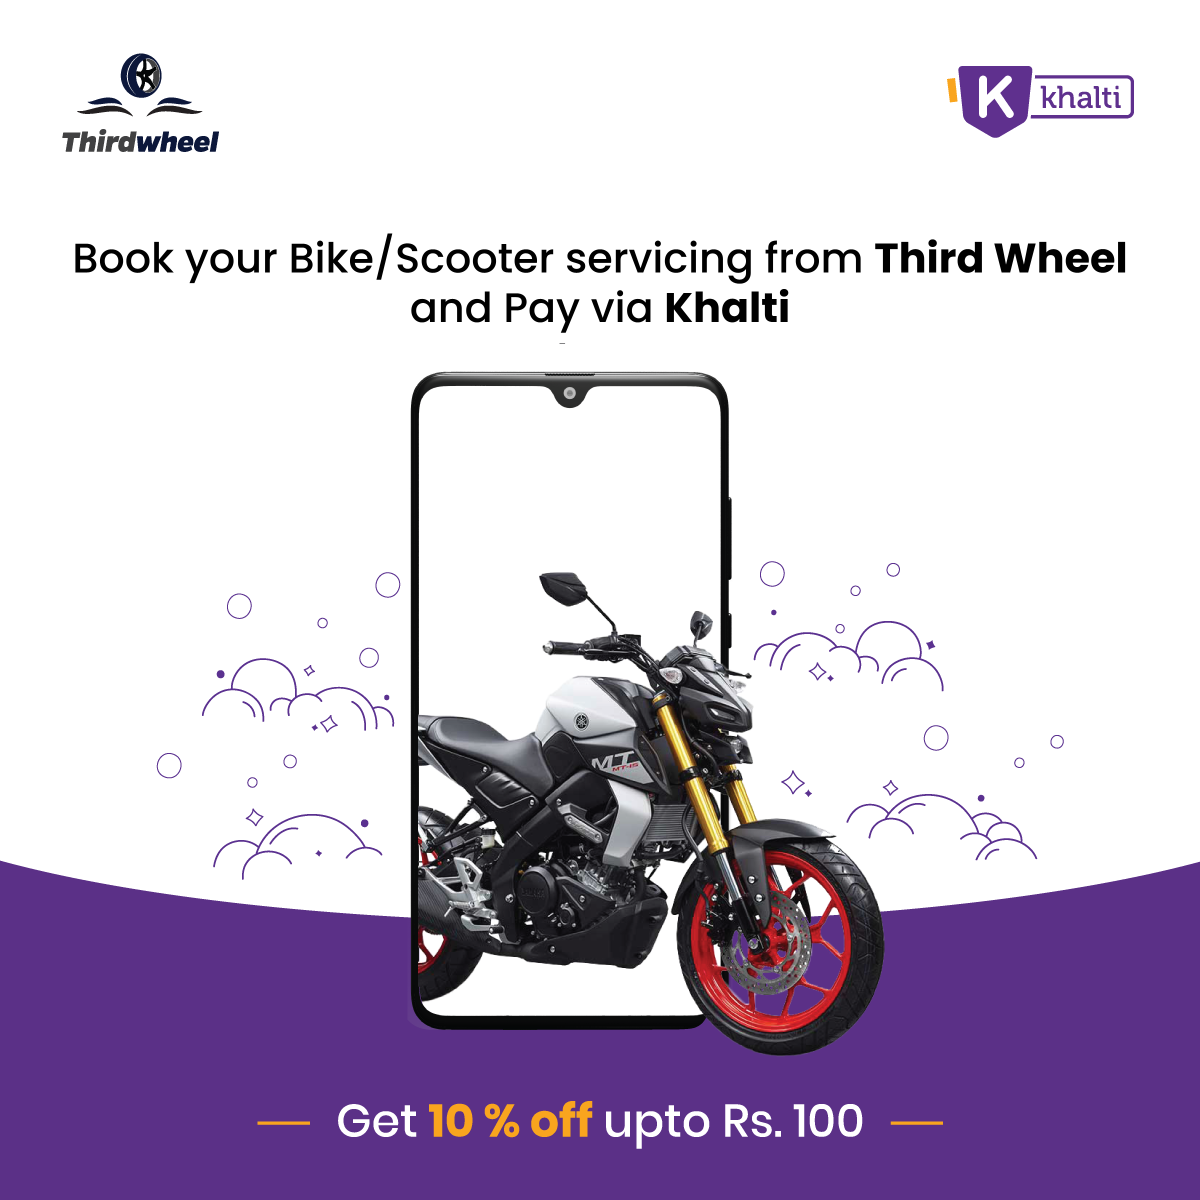 Take your bike for a fitness check at Third Wheel & get 10% cashback by paying via Khalti wallet